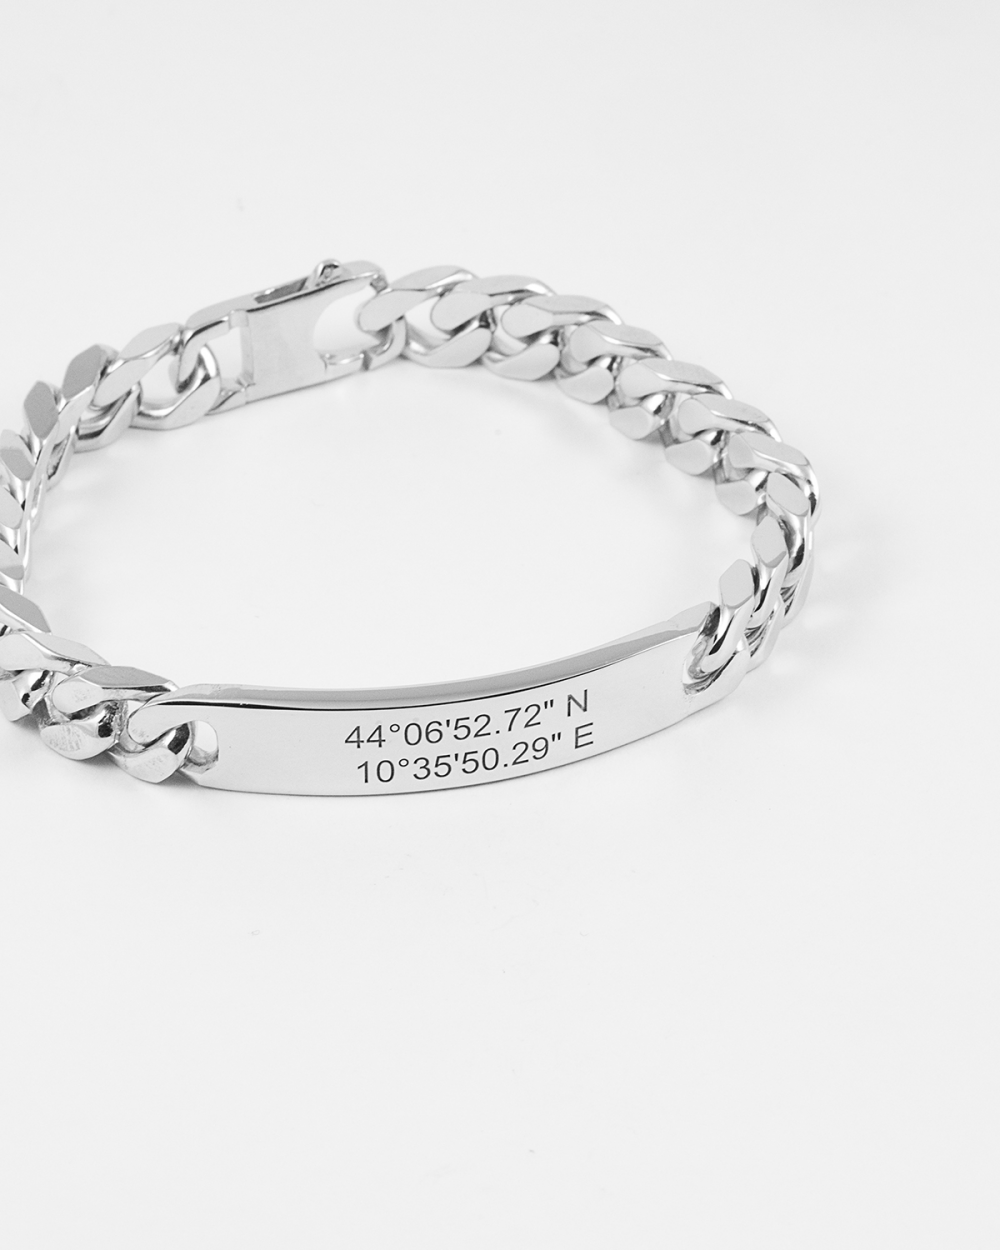 SQUARE CURB BRACELET 300 WITH PLATE